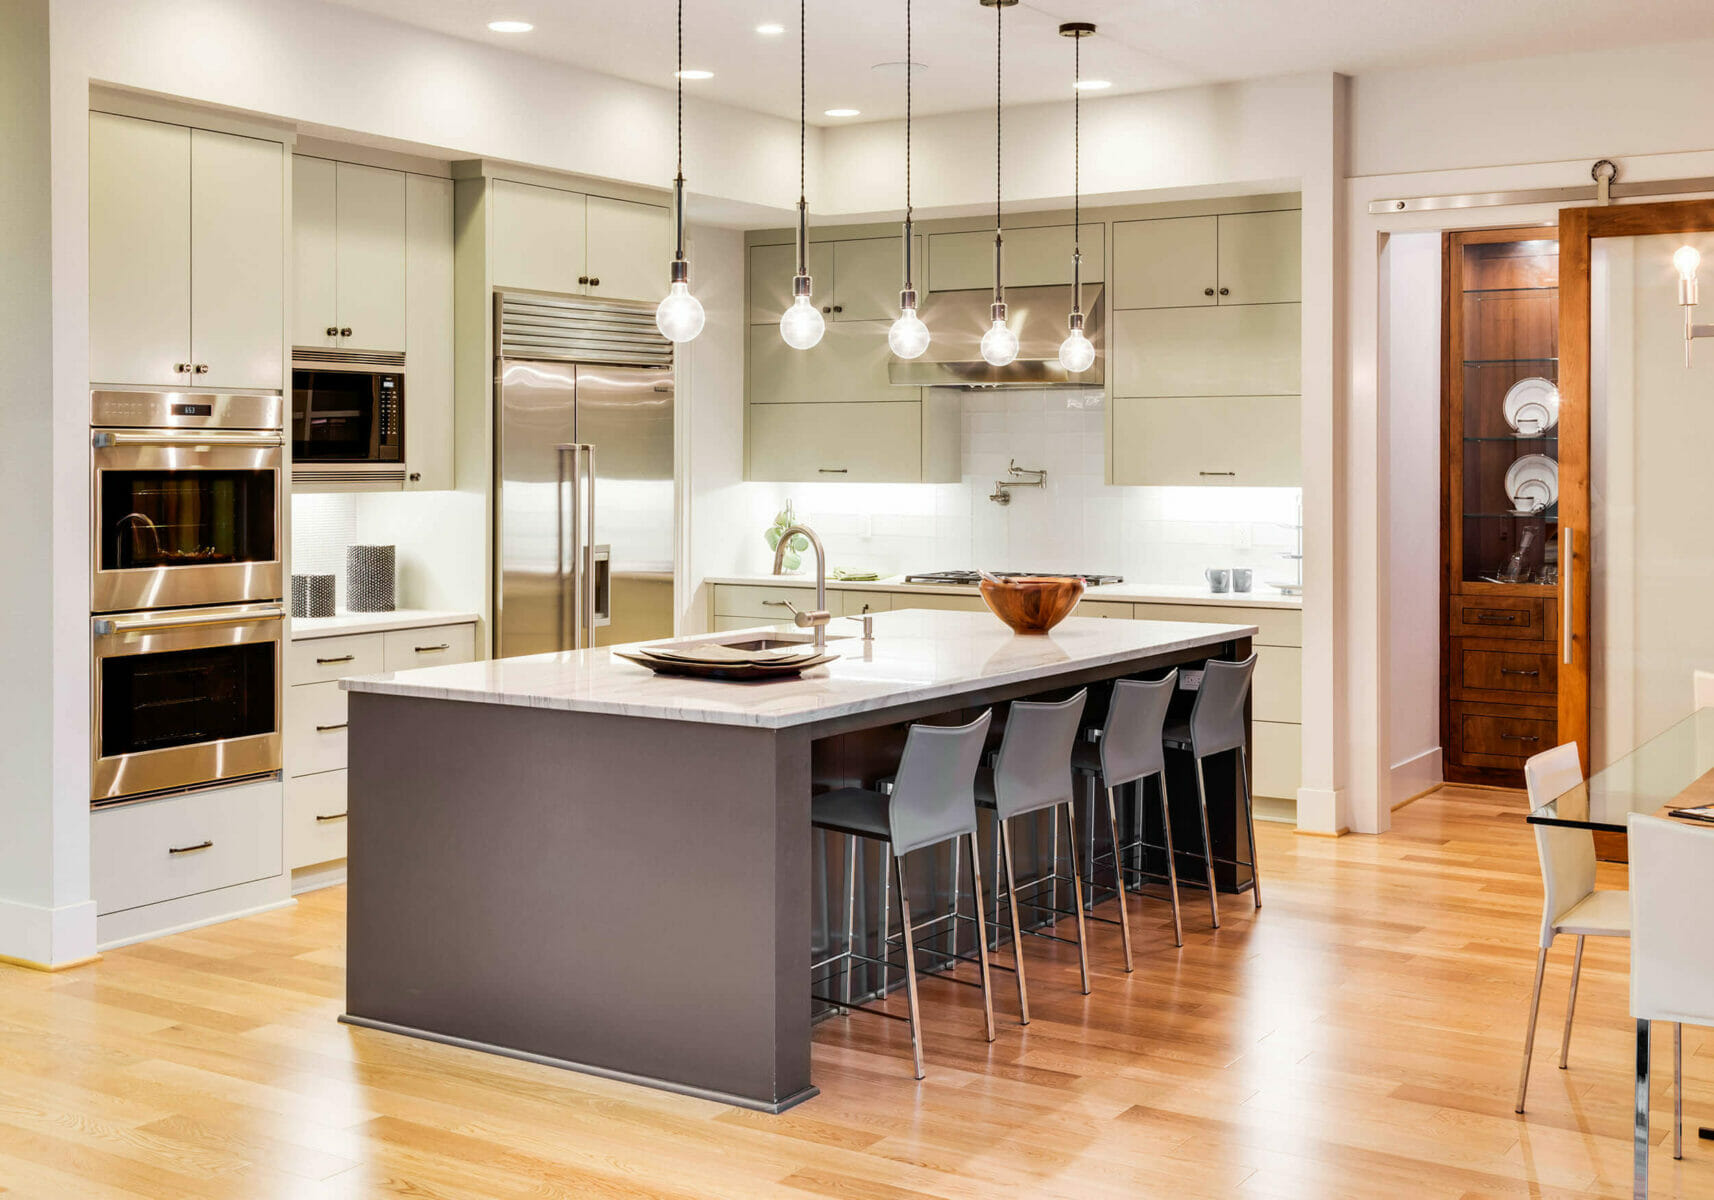 How to Choose Timeless Finishes for Your Kitchen Renovation